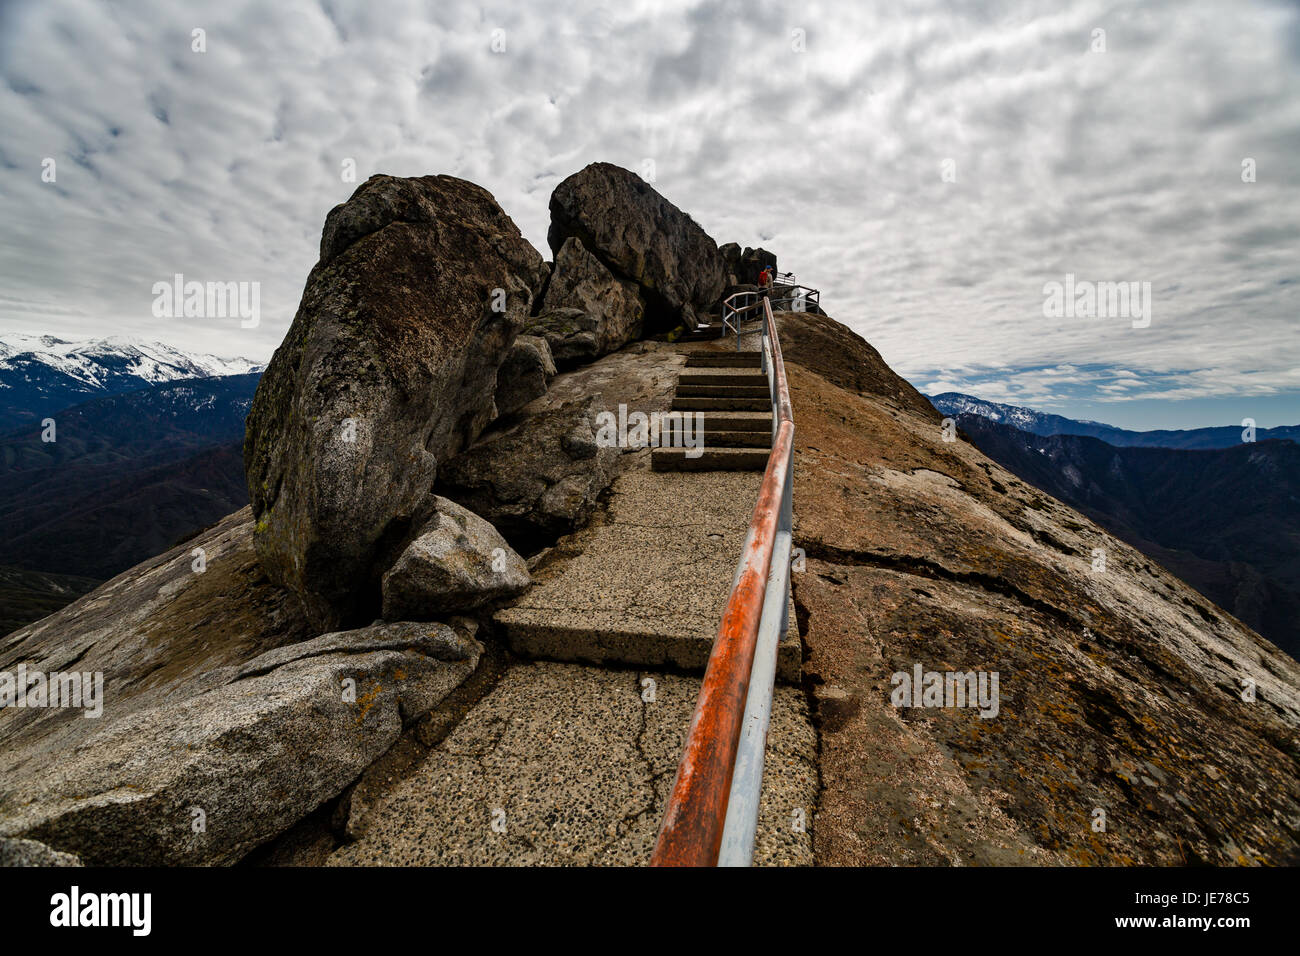 Steep Moro rock staircase rises into a cloudy sky high above the surrounding valley of Sequoia National Park Stock Photo